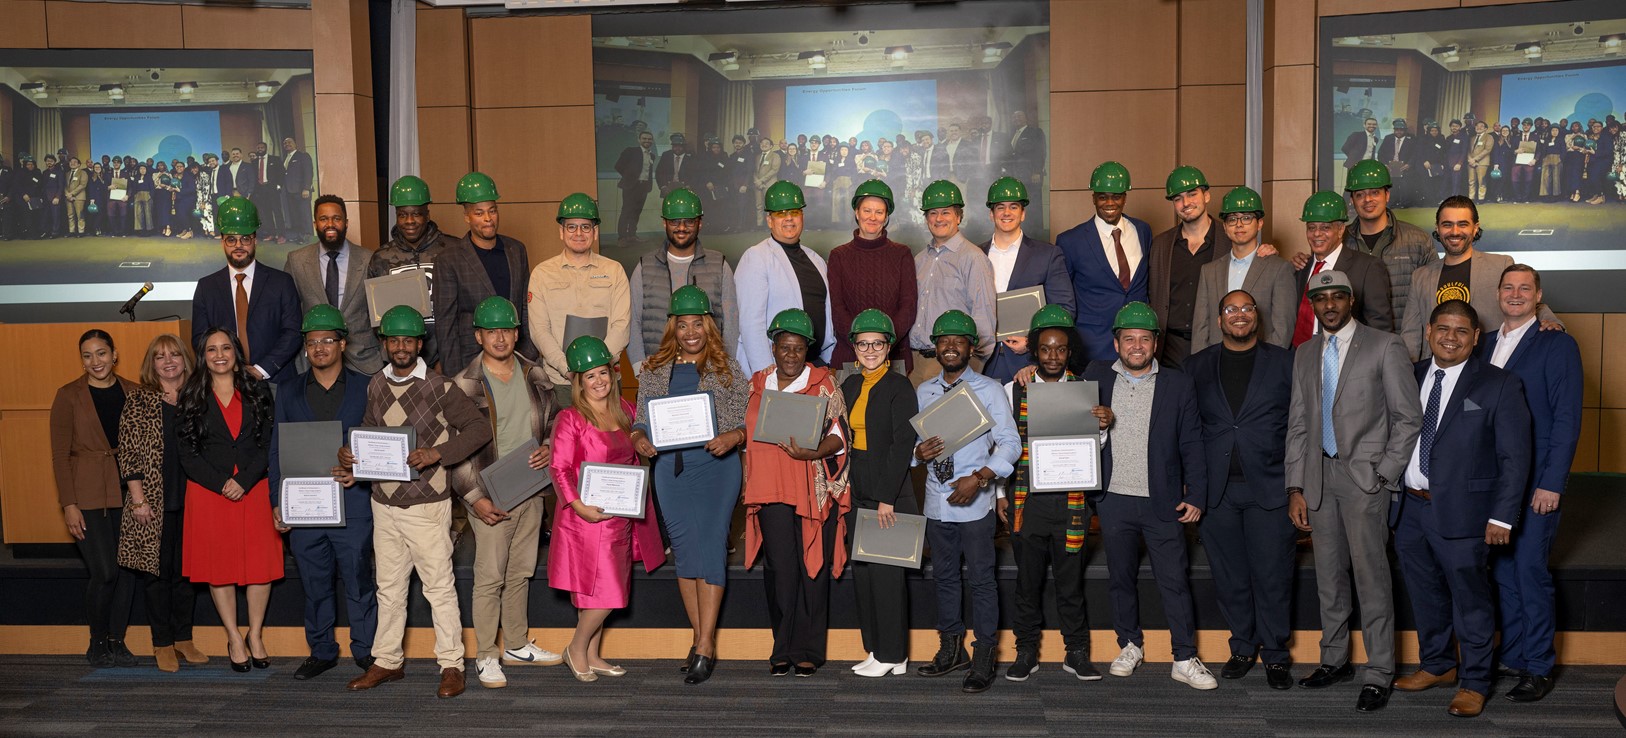 The graduation of the 24th cohort of the Clean Energy Academy.